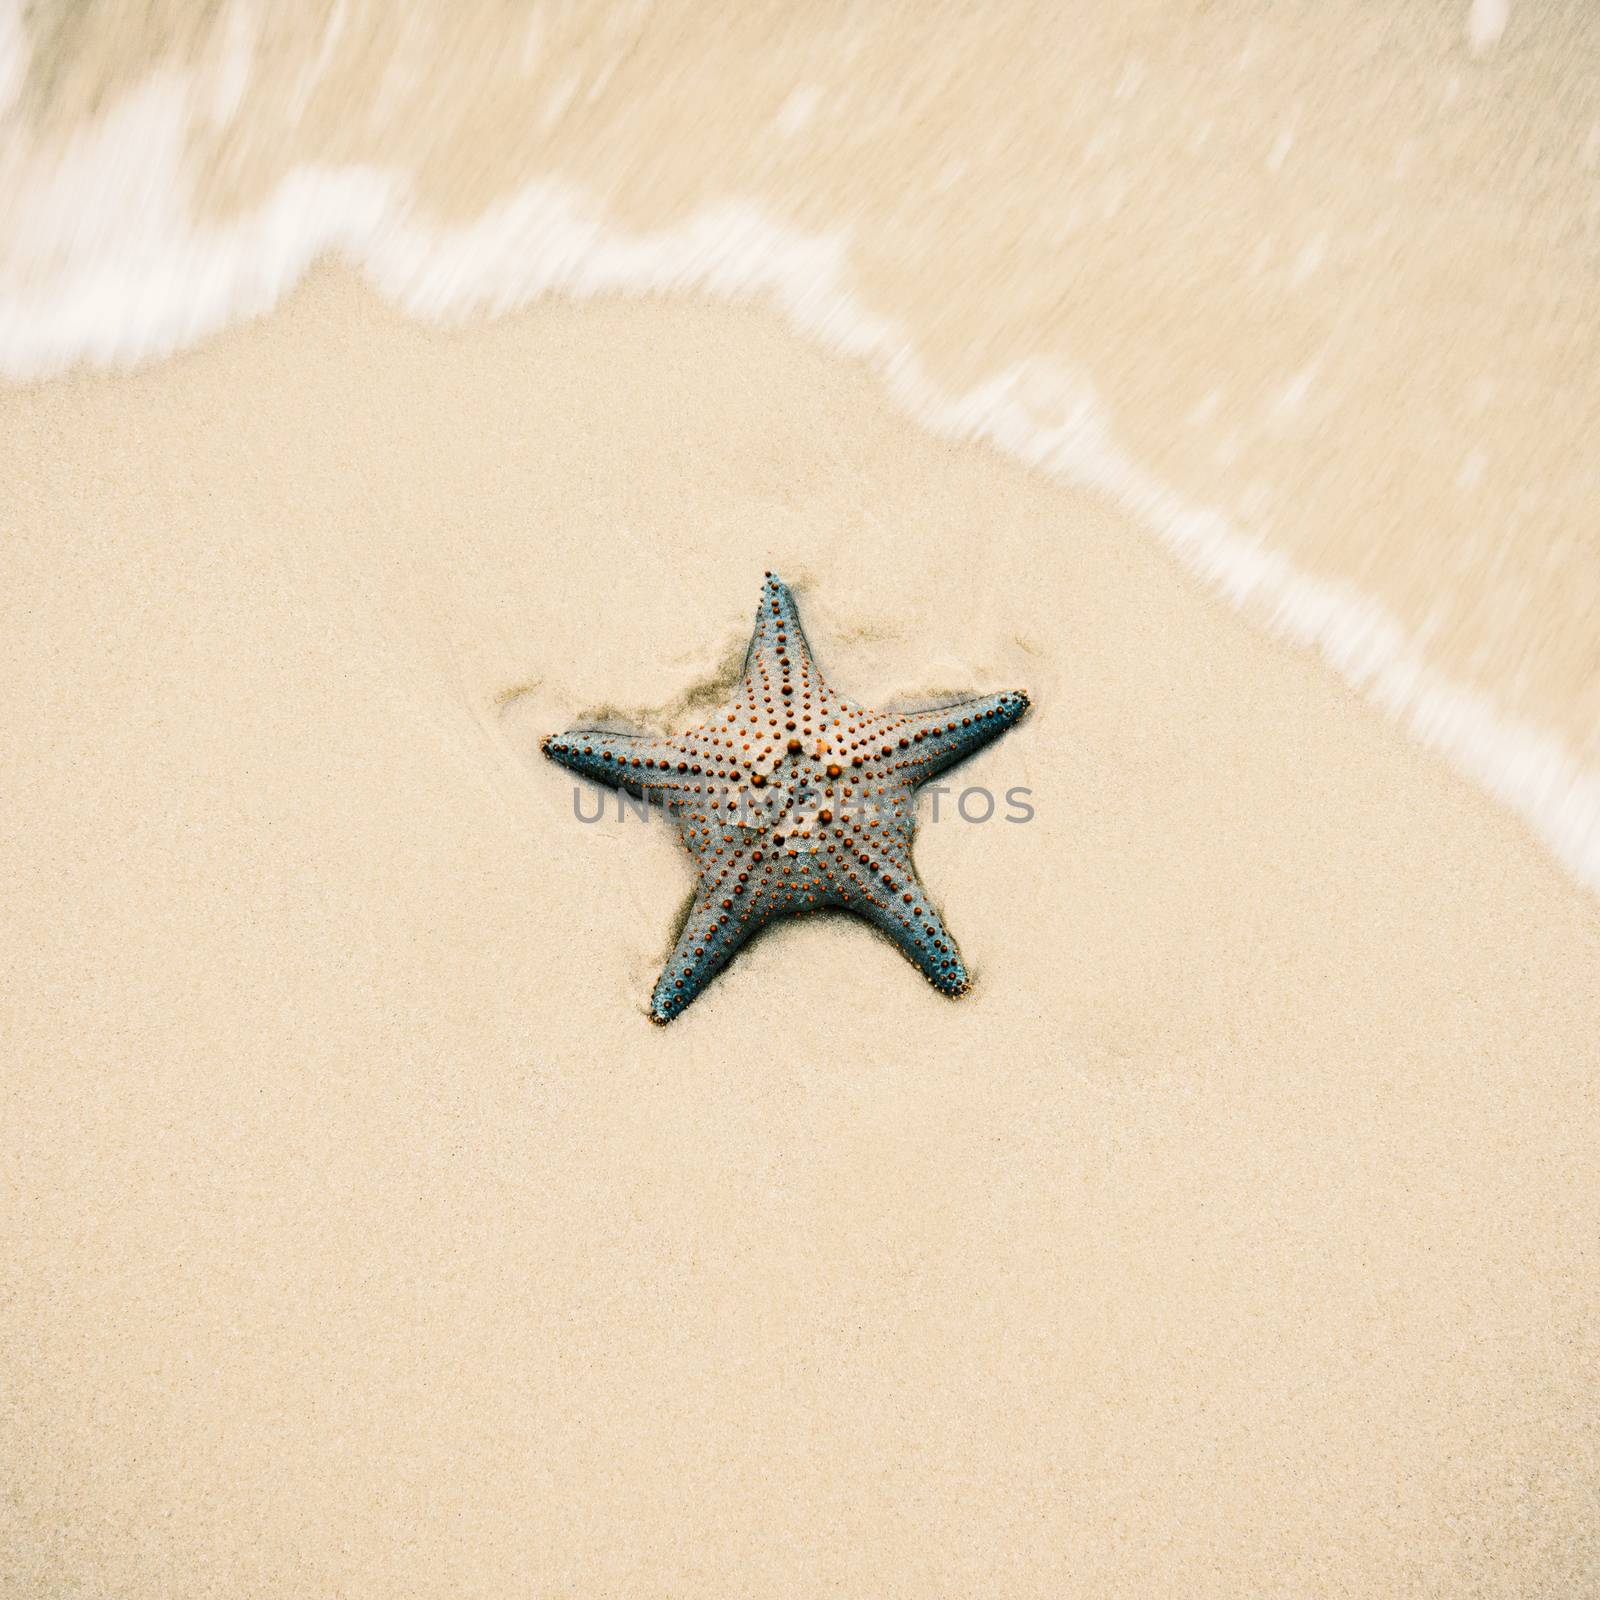 Starfish by itself on the beach at Moreton Bay during the day.